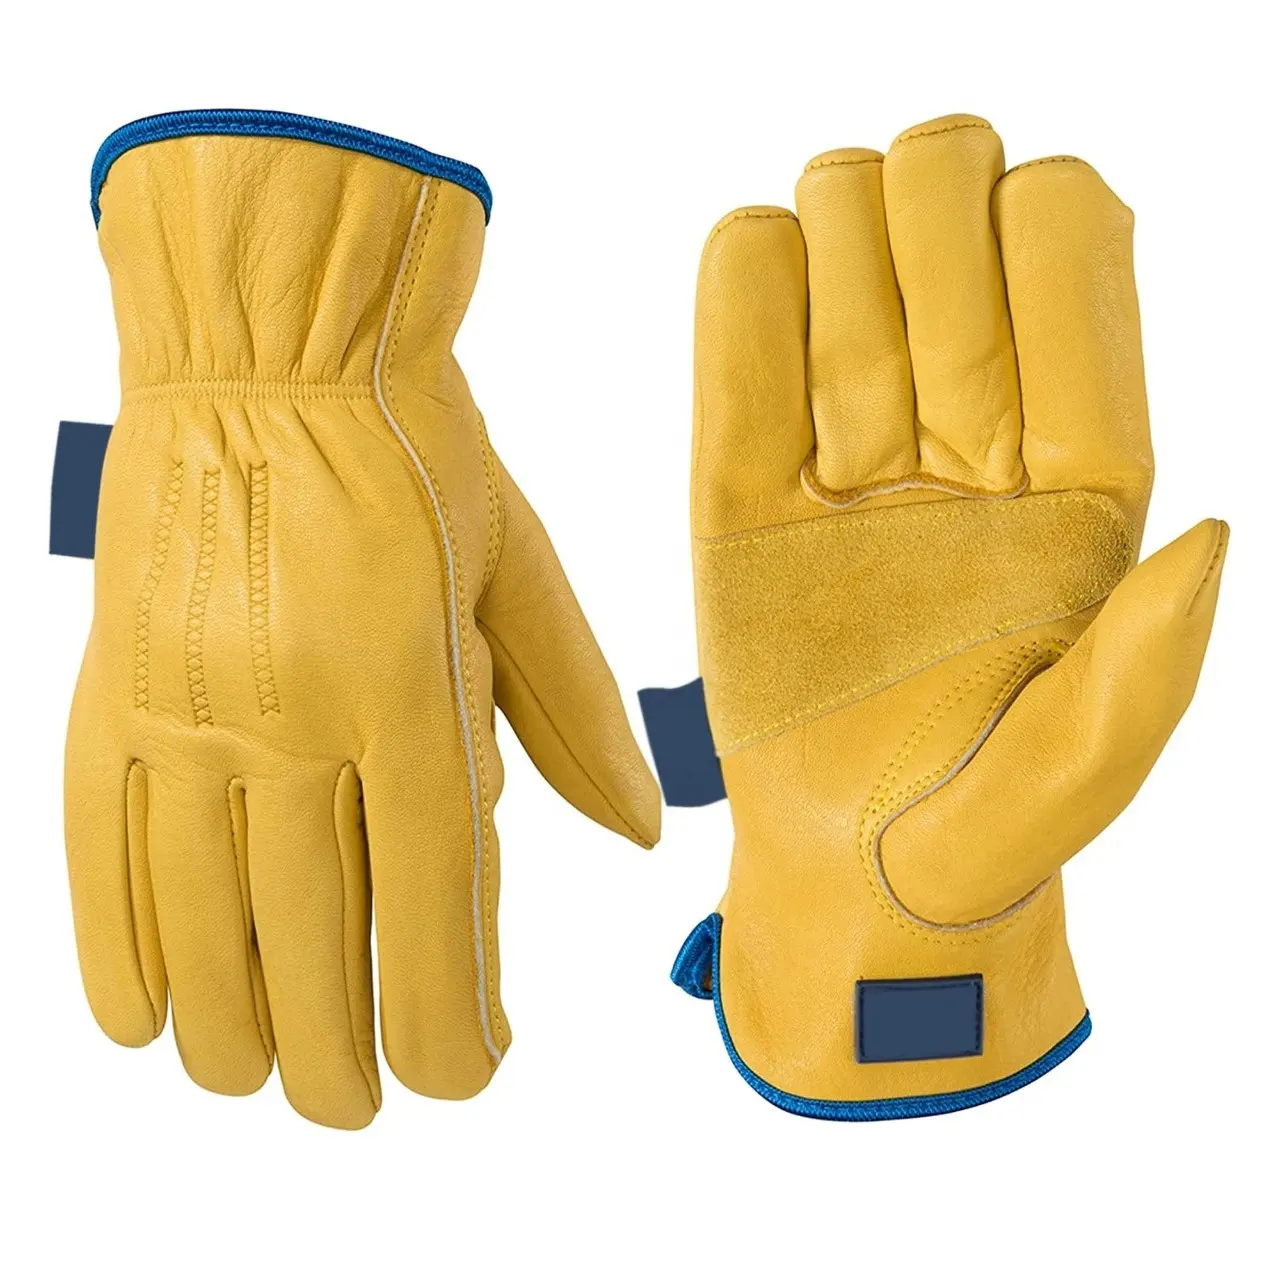 Cow Split Industrial Heavy Duty Garden Cut Resistant Safety Protective Heated Working Hand Leather Construction Gloves